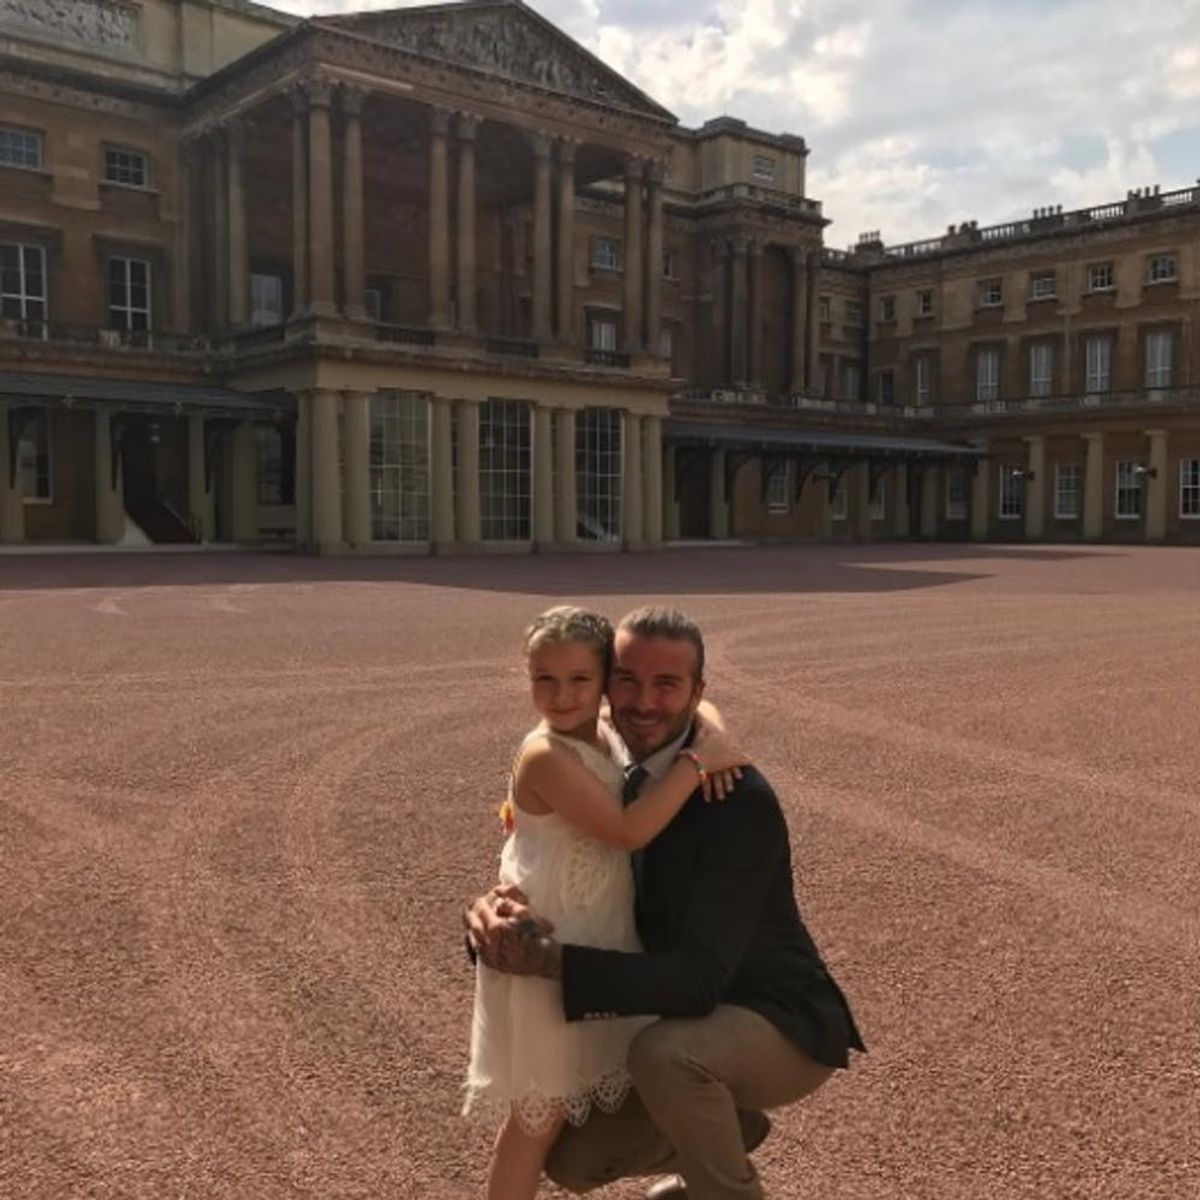 Harper Beckham Celebrated Her Birthday at Buckingham Palace With a Real Princess